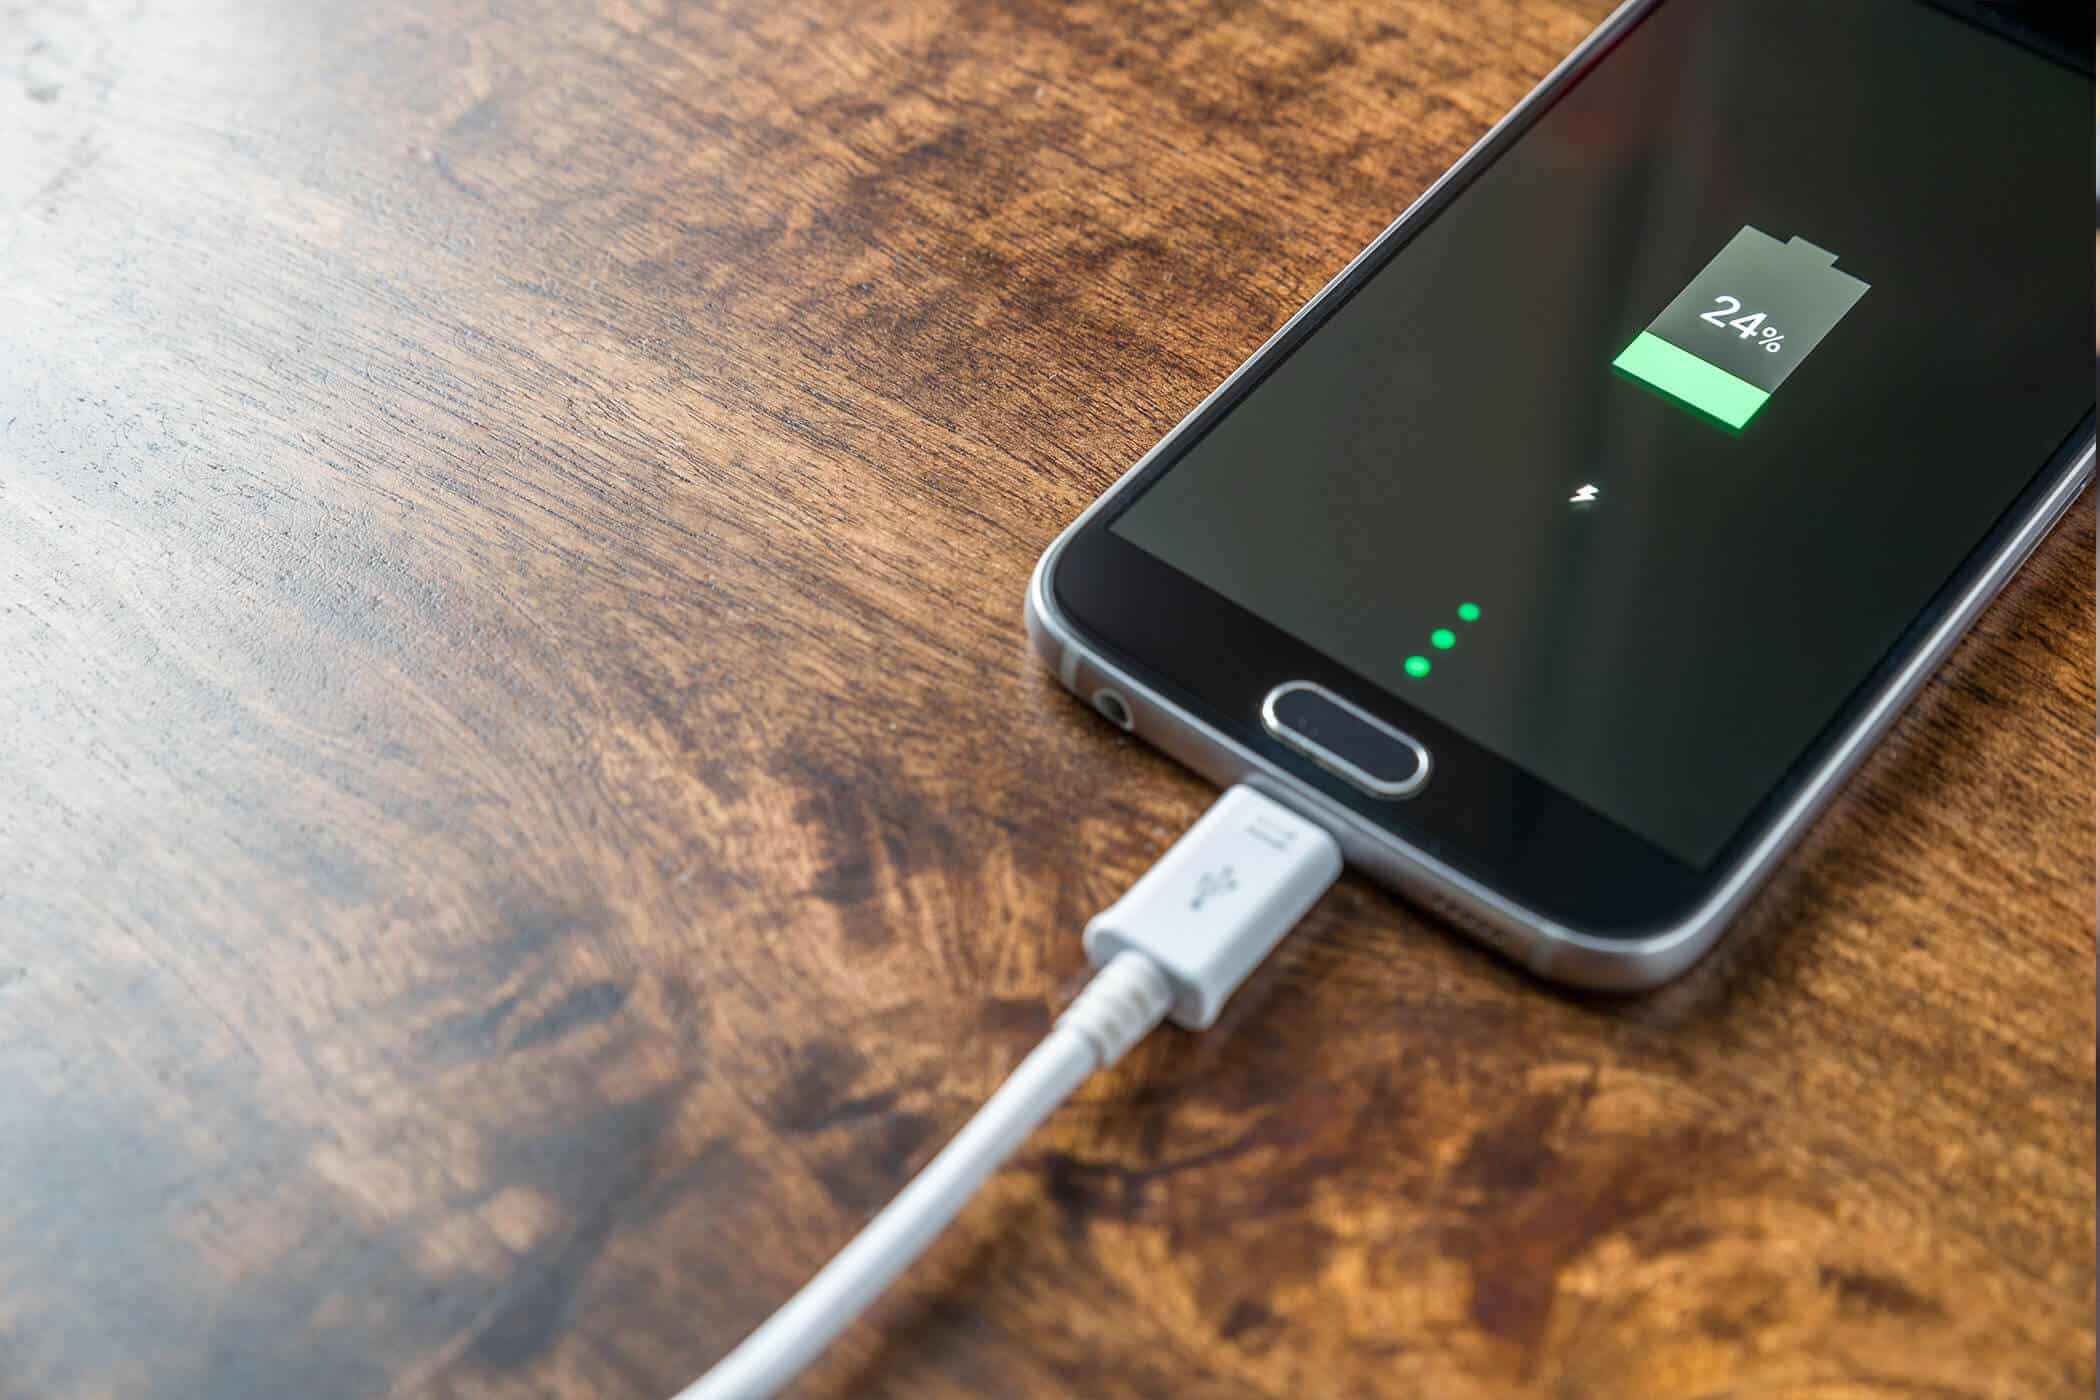  A smartphone is plugged into a fast charger with a green battery icon indicating it is charging.